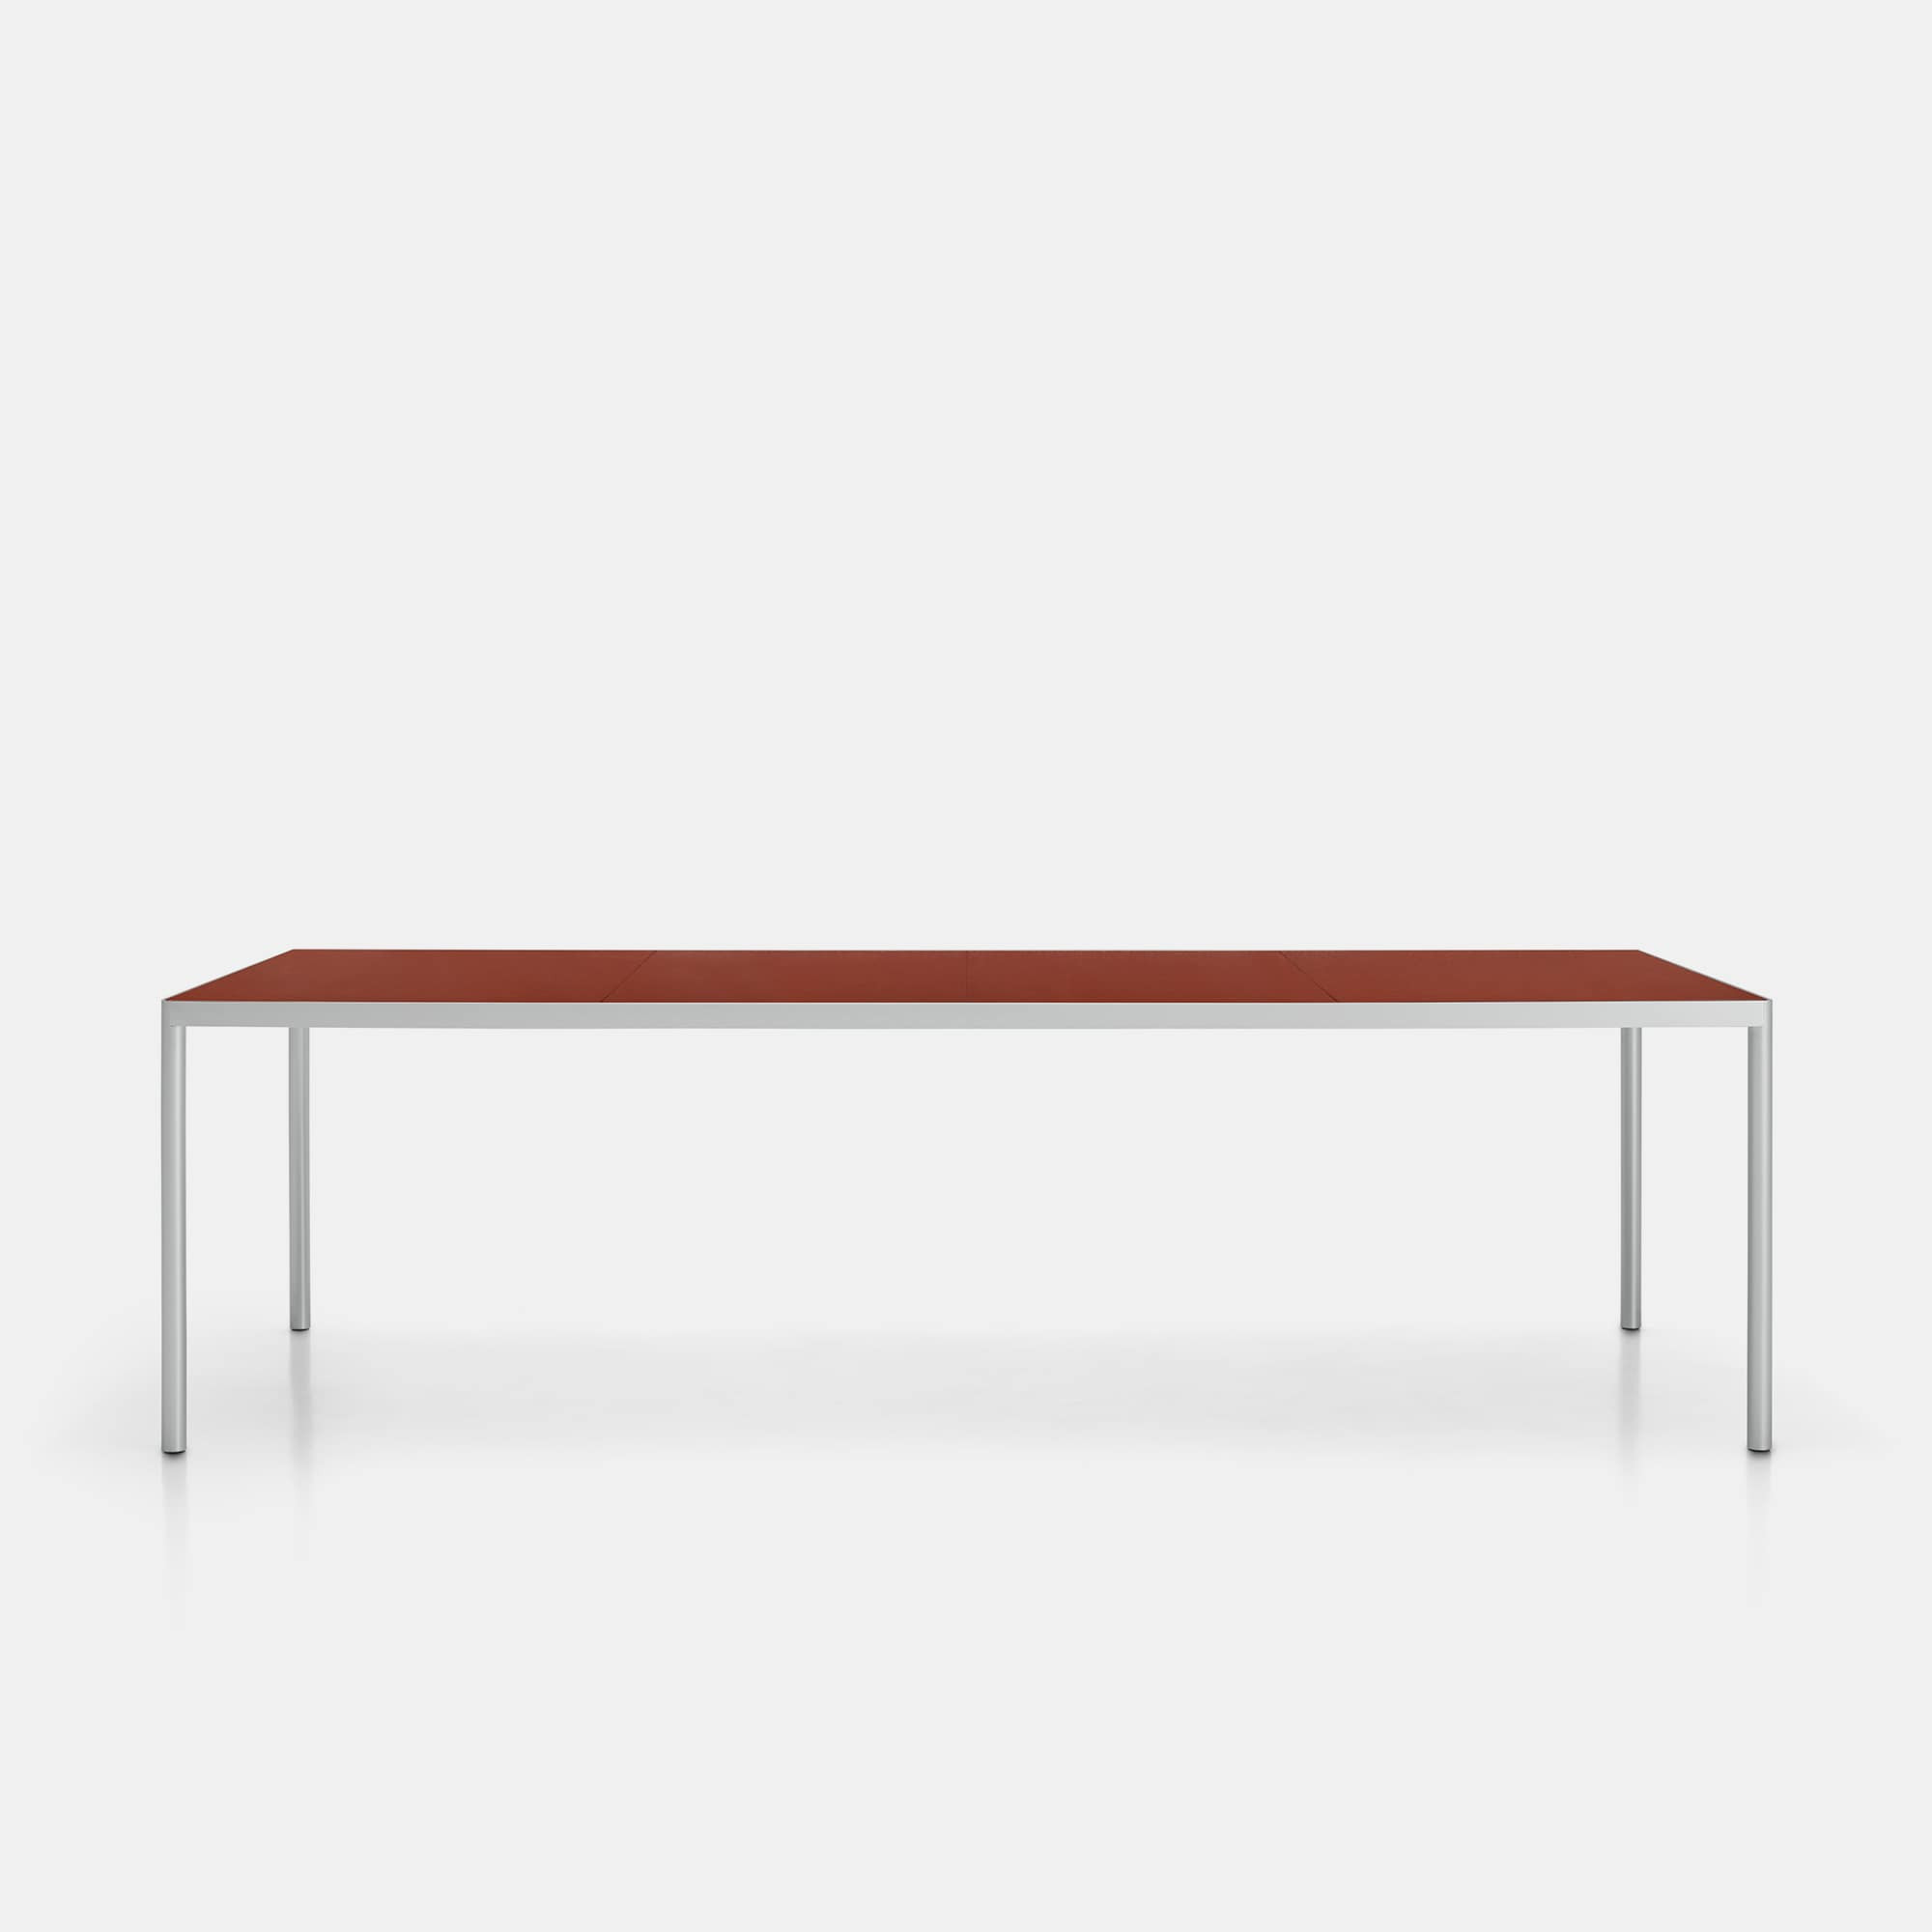 Offset Indoor / Outdoor Table ☞ Use: Outdoor ☞ Structure: Brushed Anodised Aluminium X137 ☞ Top: Reconstructed Stone Brick Red X160